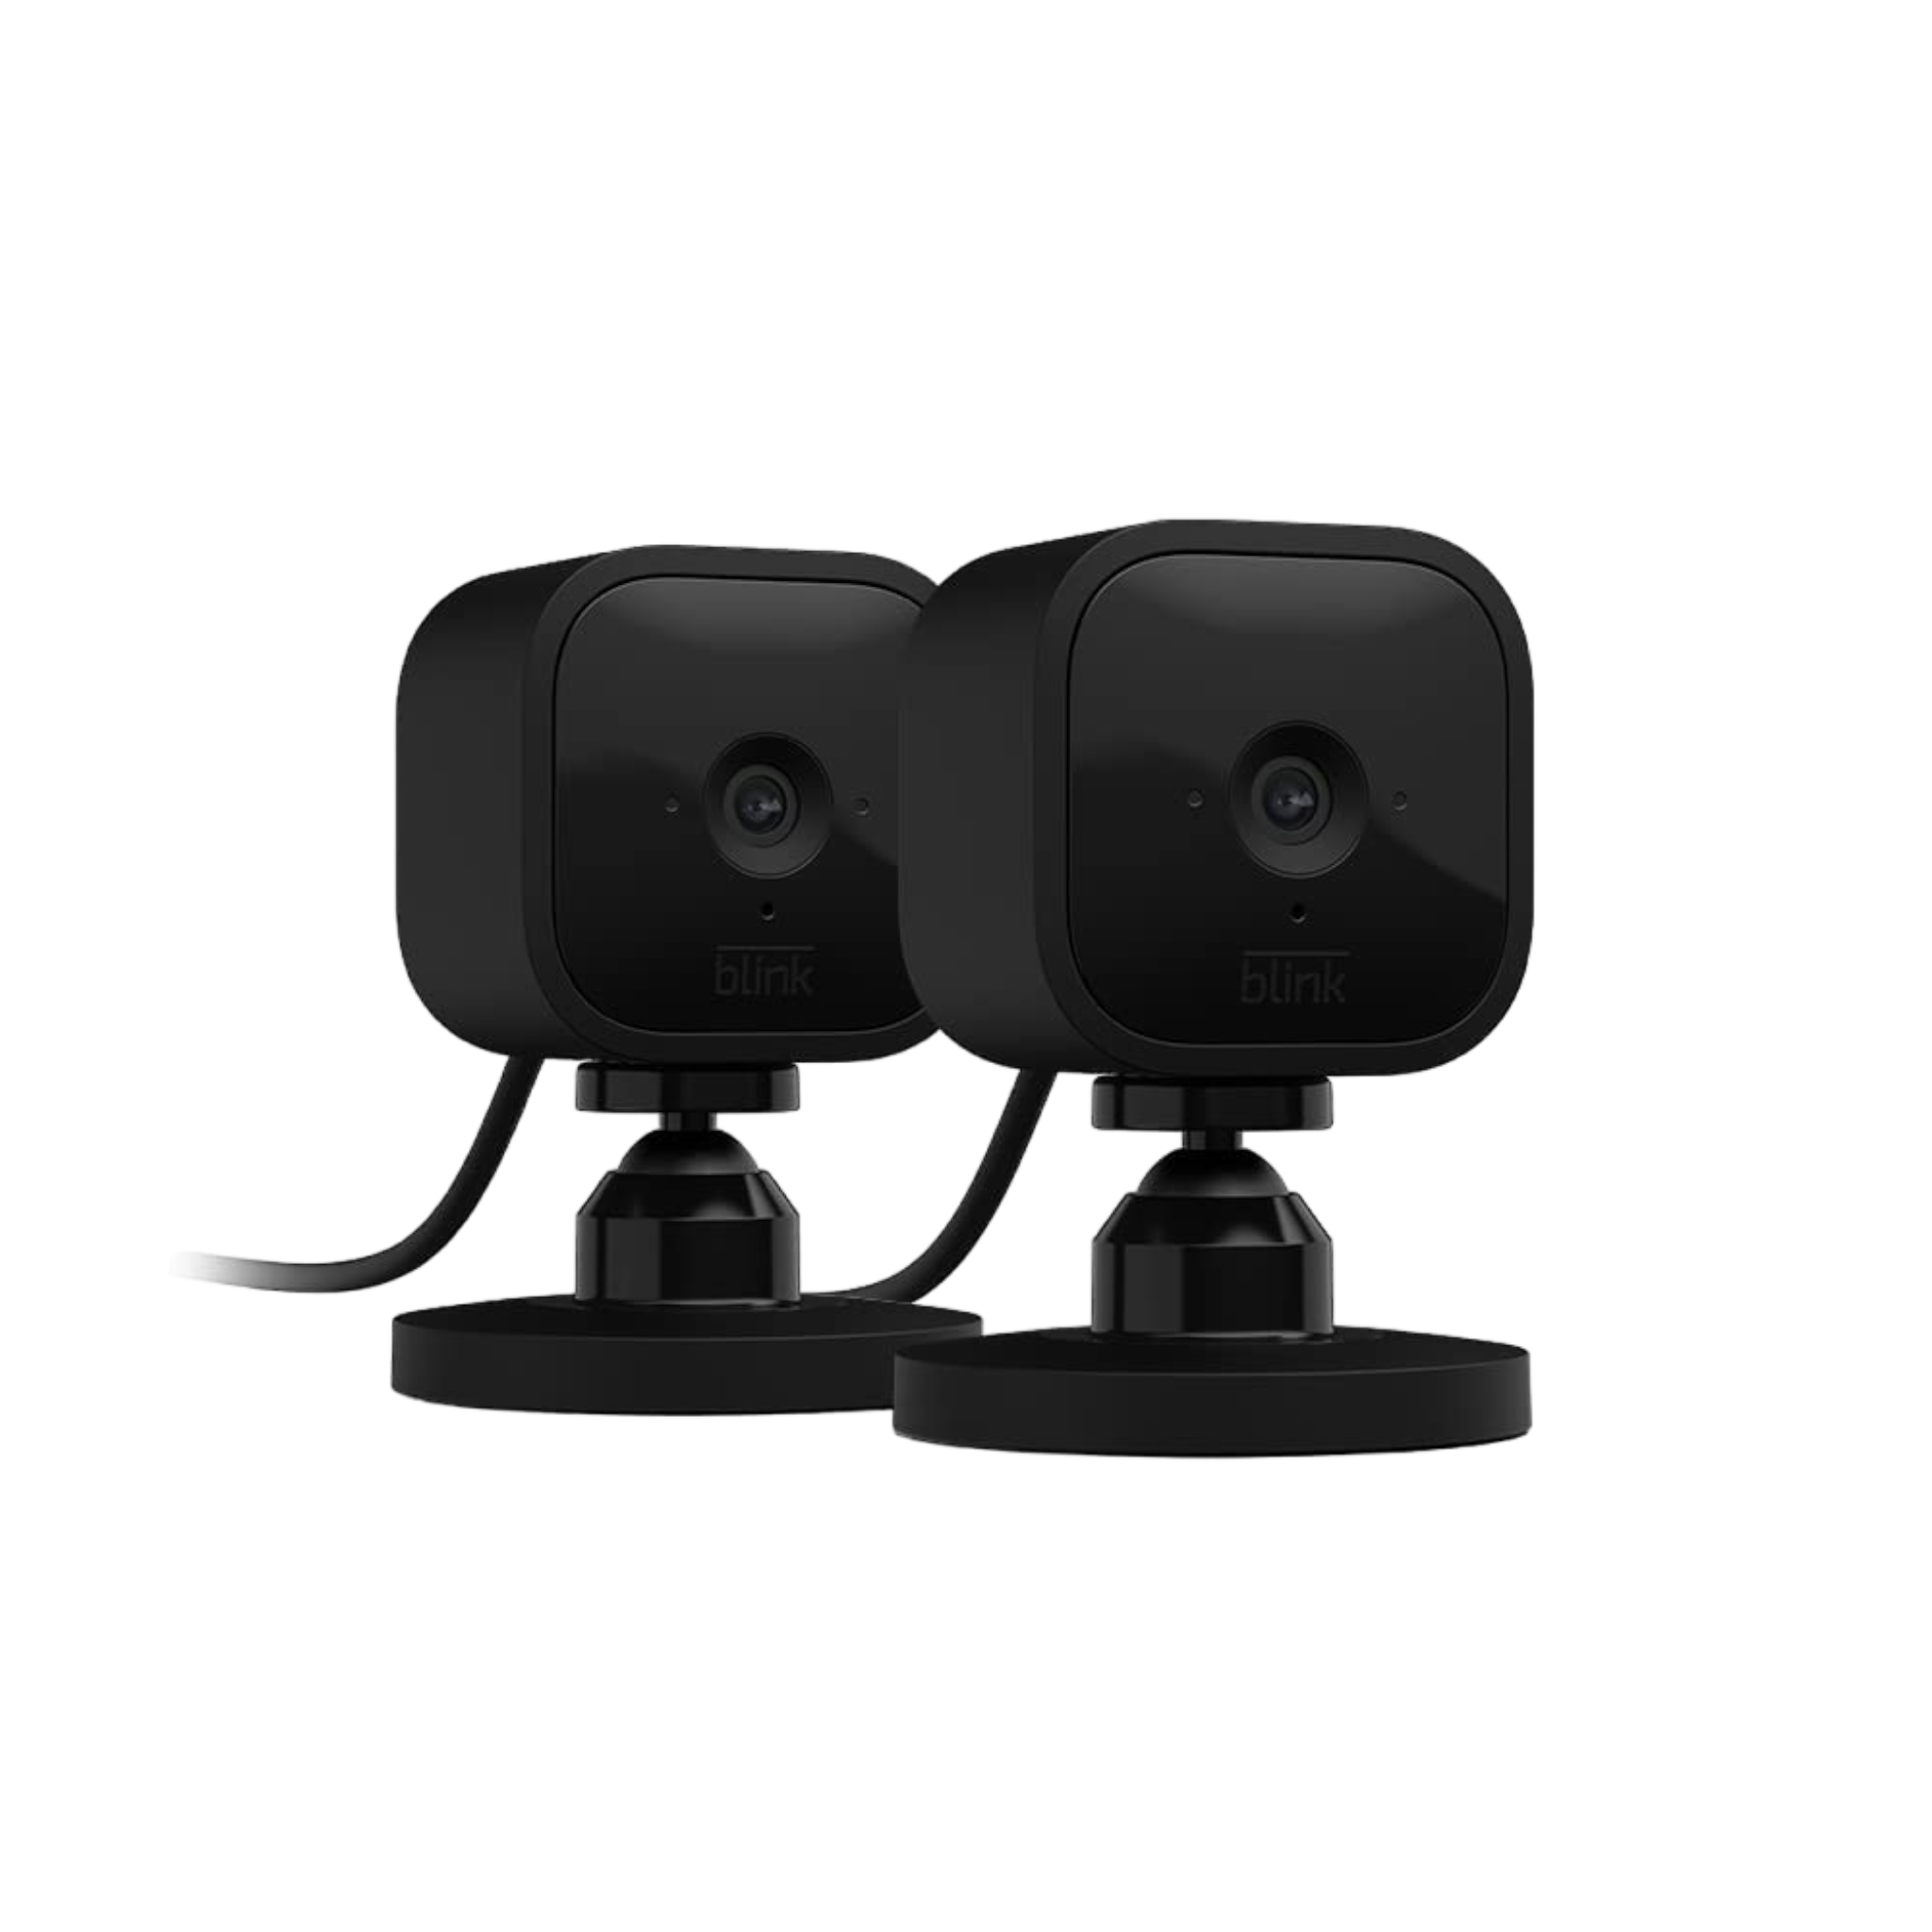 2 Pack Blink Mini Indoor 1080p Wi-Fi Security Camera with Motion Detection, Night Vision - Black - Pro-Distributing